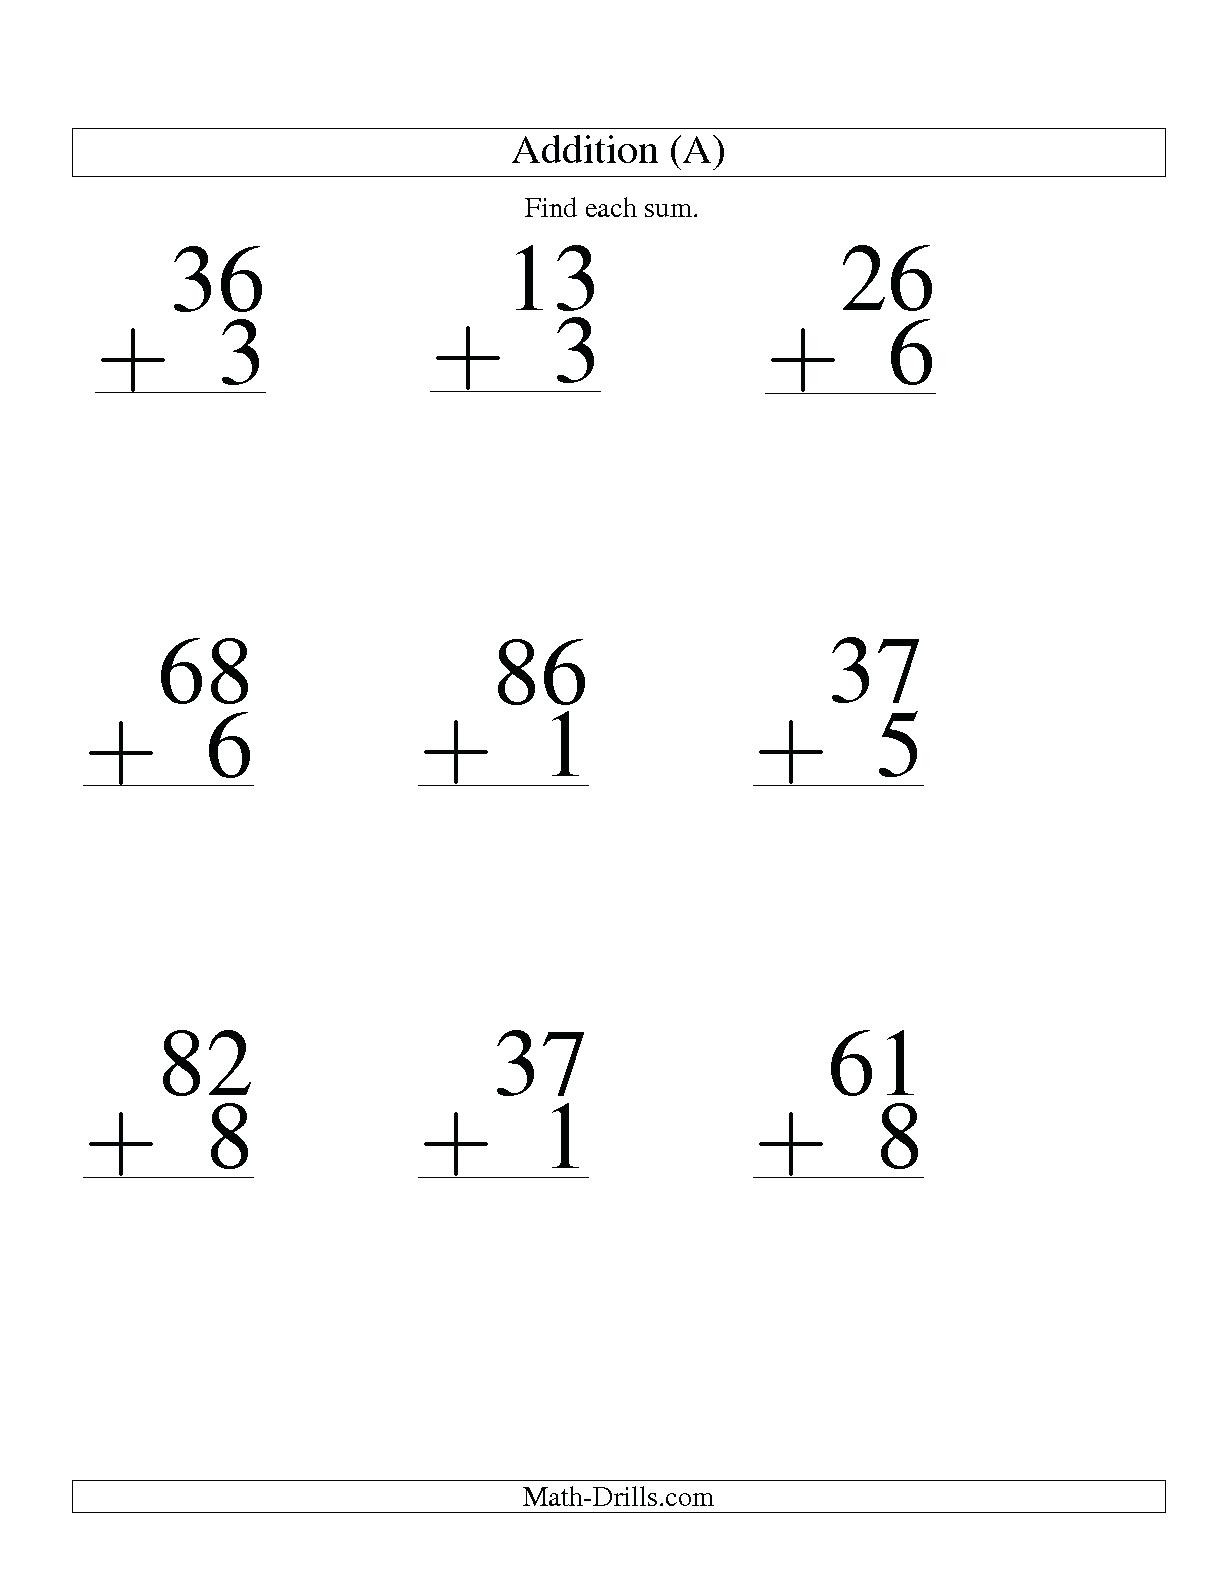 Free Math Worksheets First Grade 1 Addition Adding 2 Digit Plus 1 Digit No Regrouping